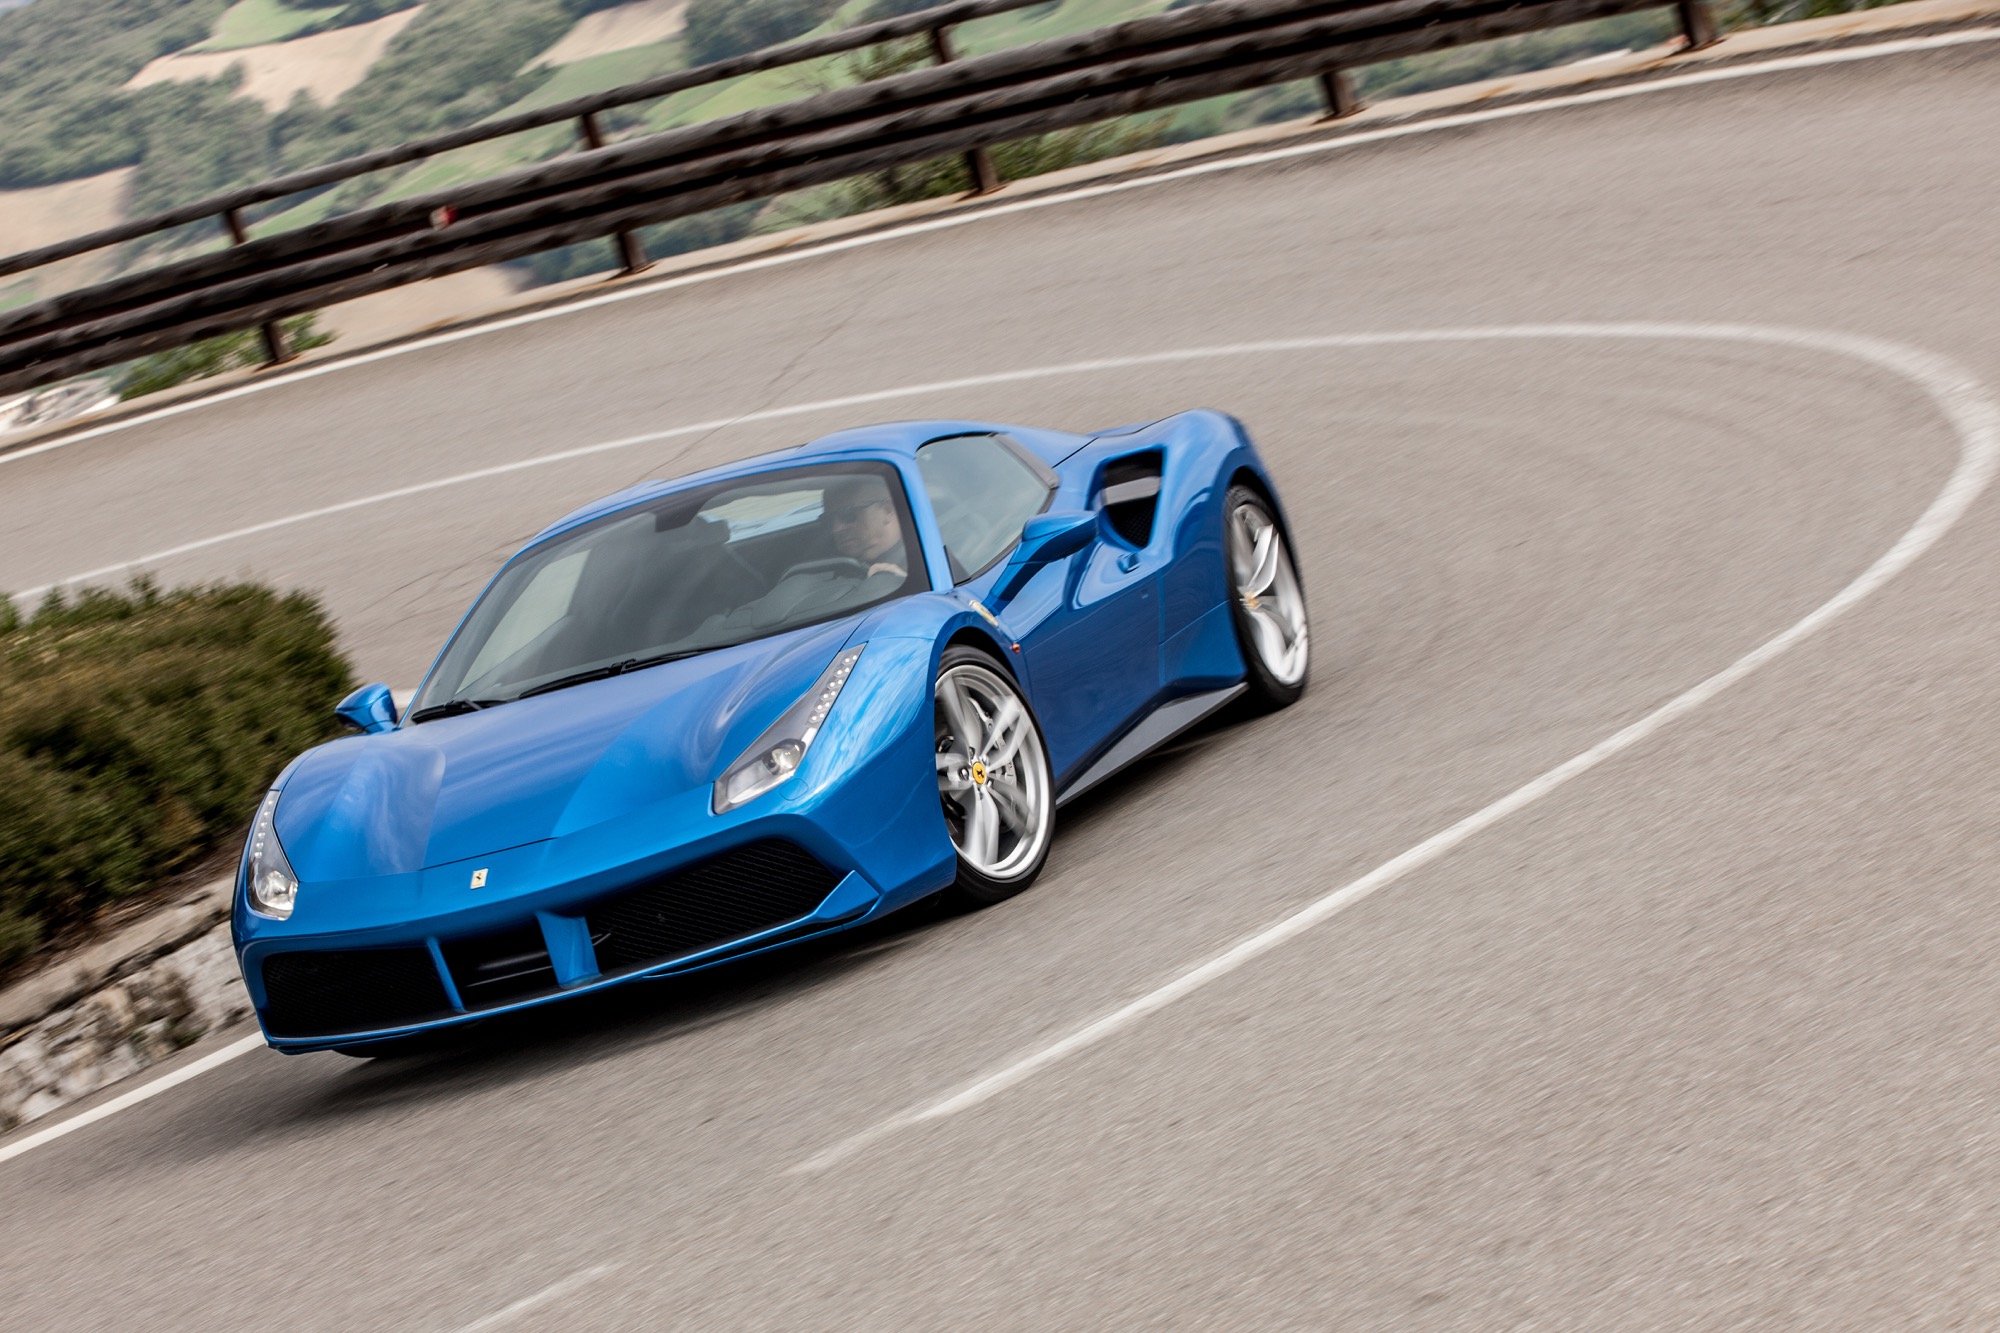 2016 Ferrari 488 Spider Review First Drive Caradvice